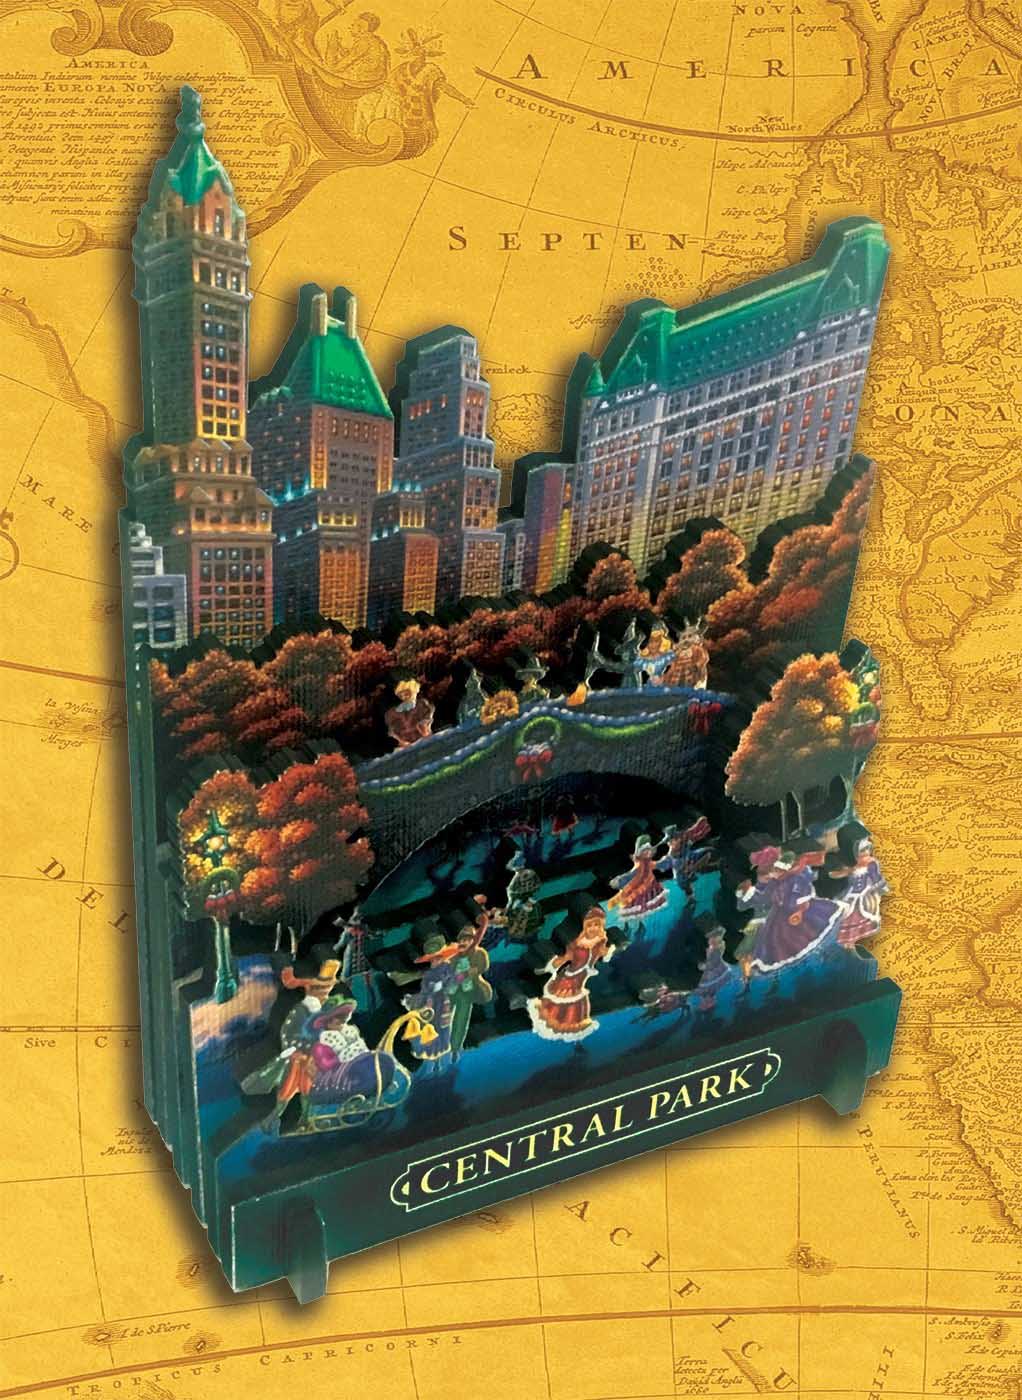 Grand Canyon National Parks Jigsaw Puzzle By Boardwalk